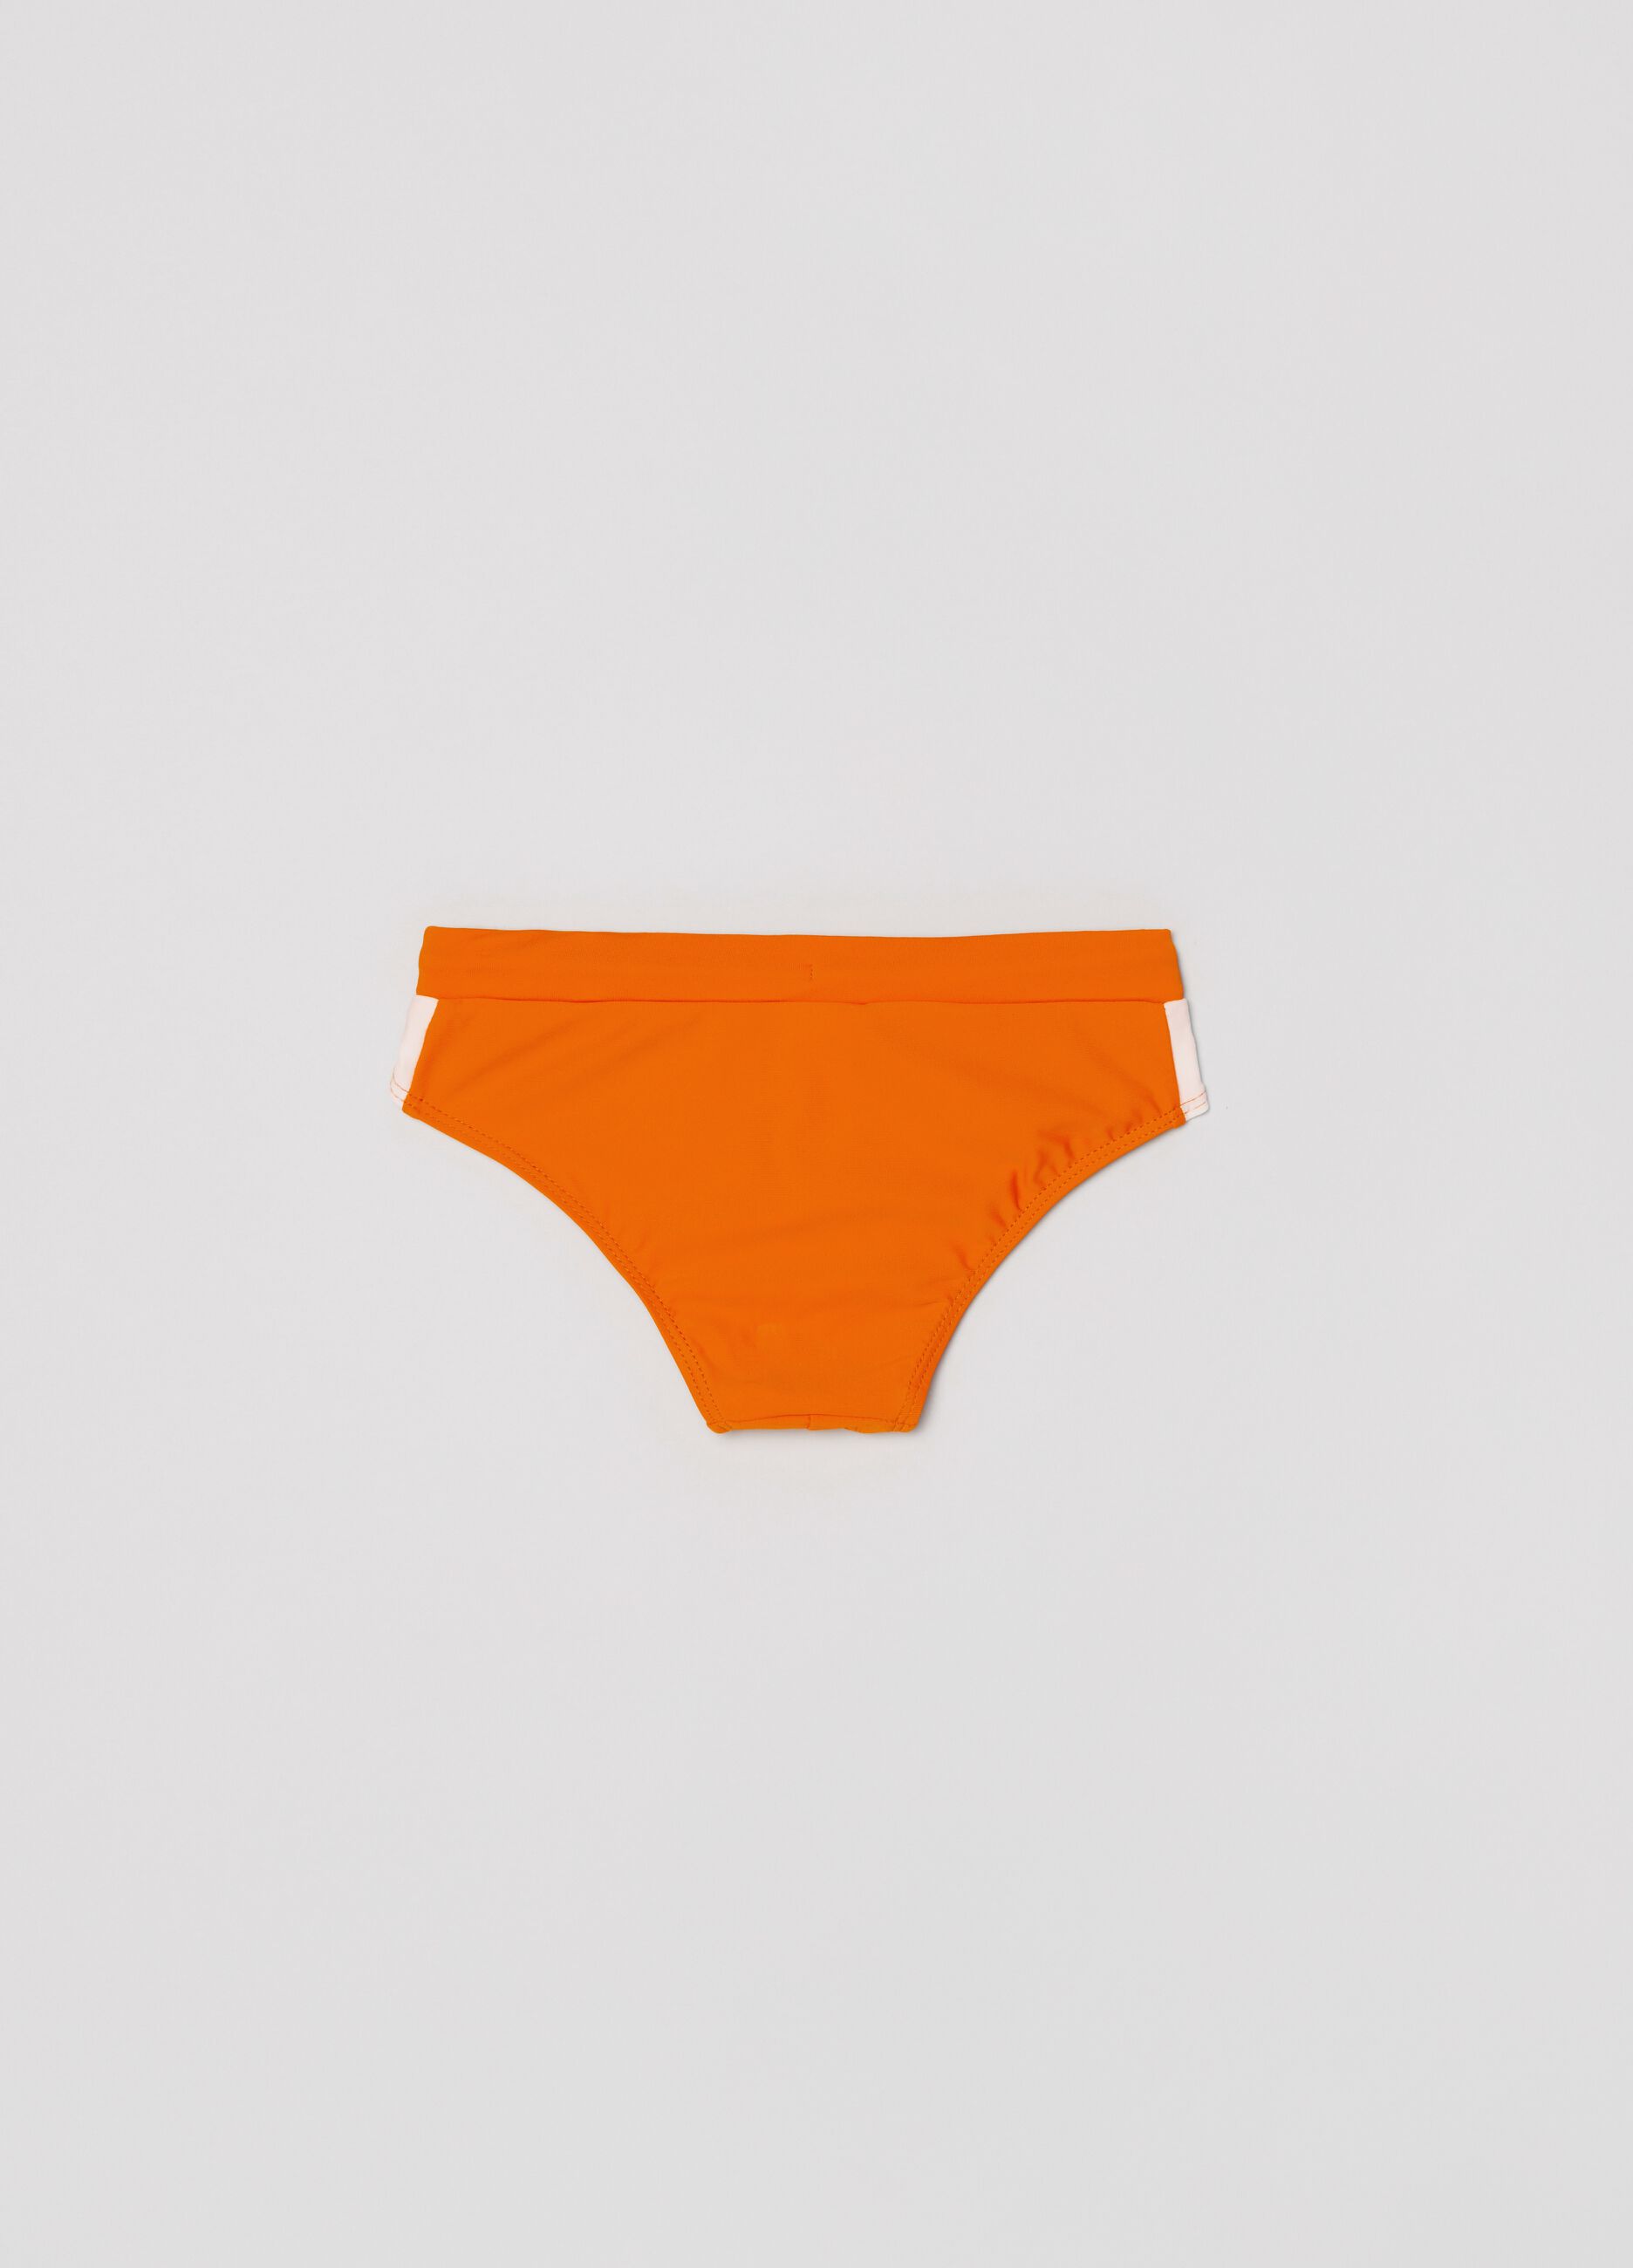 Swim briefs with contrasting bands